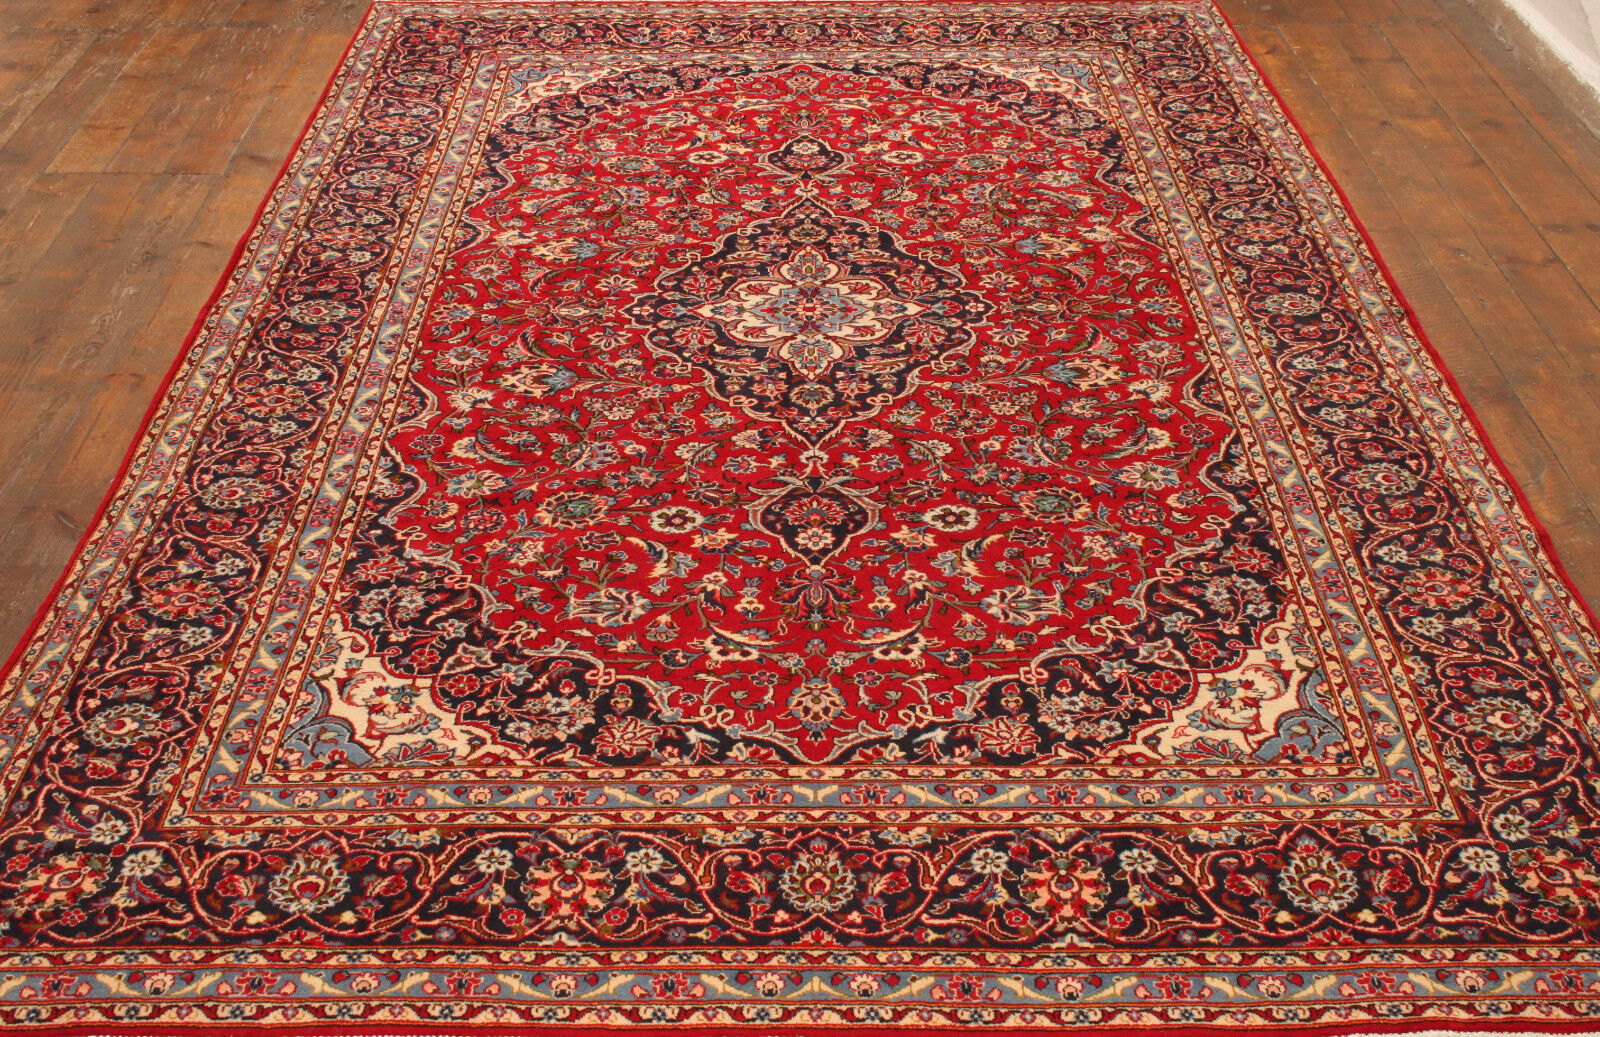 Angled shot of the Handmade Vintage Persian Style Kashan Rug complementing furniture